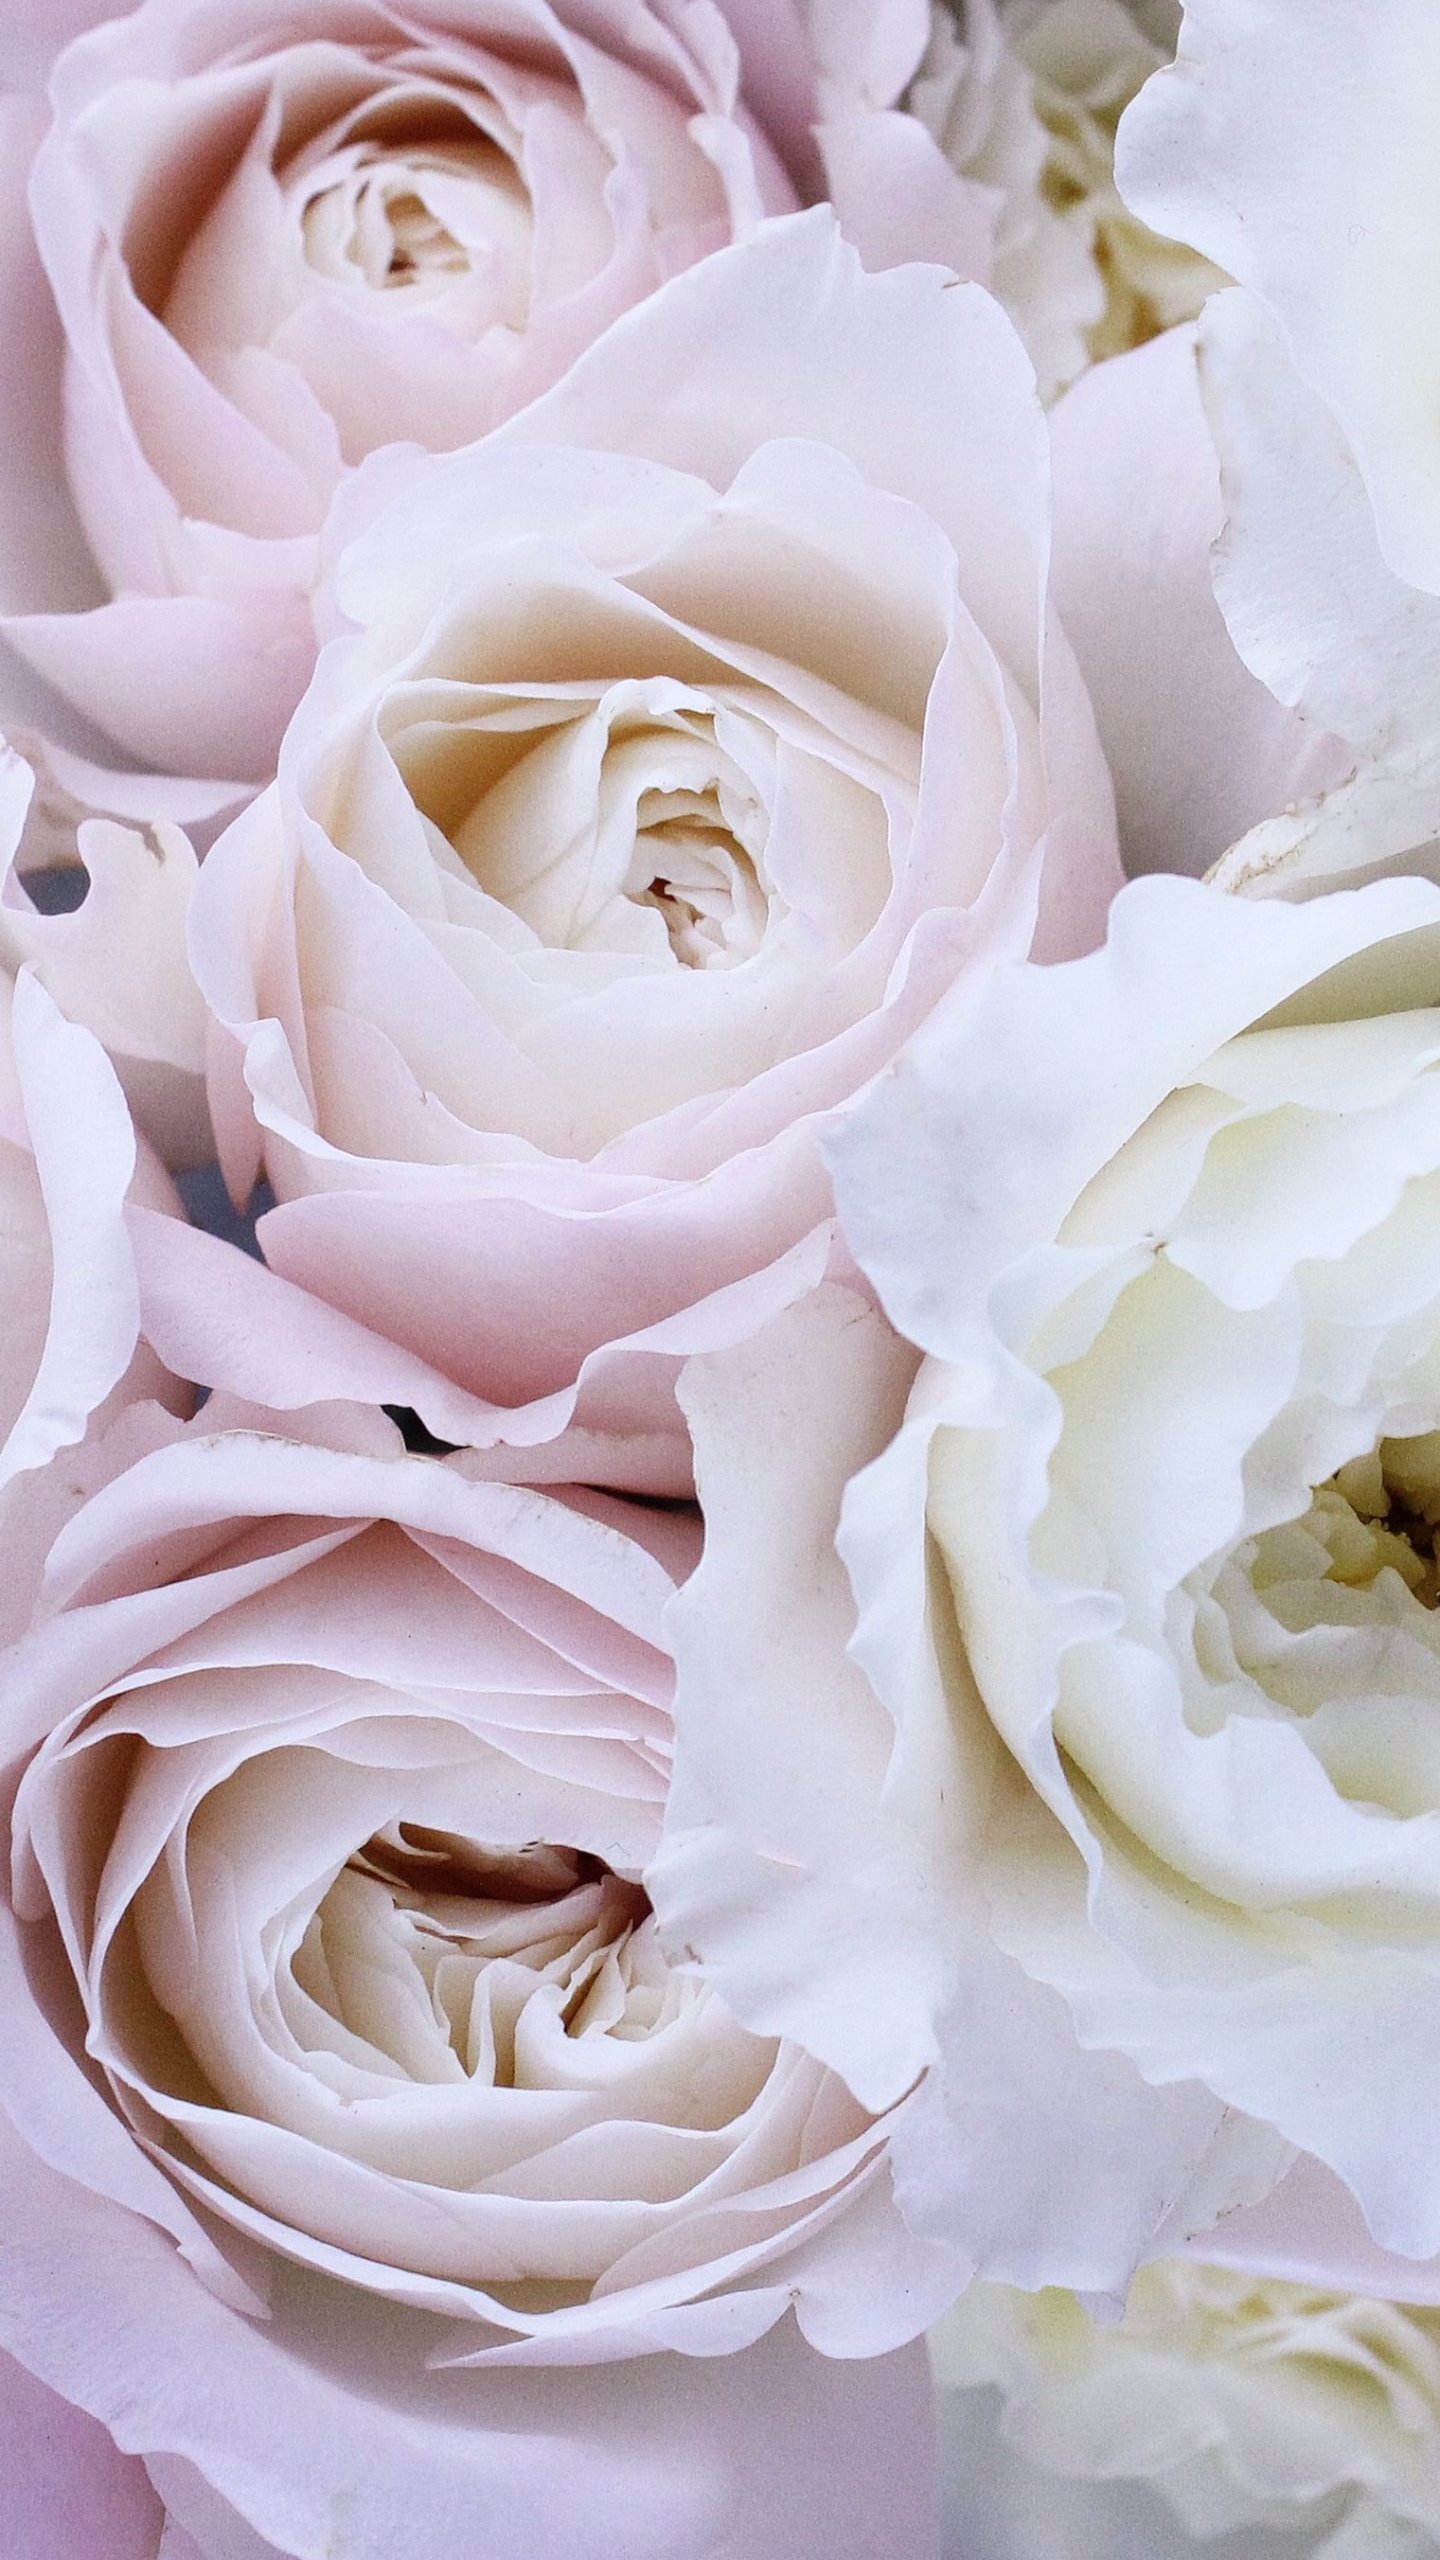 Pale Pink and White Roses Wallpaper - iPhone, Android & Desktop Backgrounds